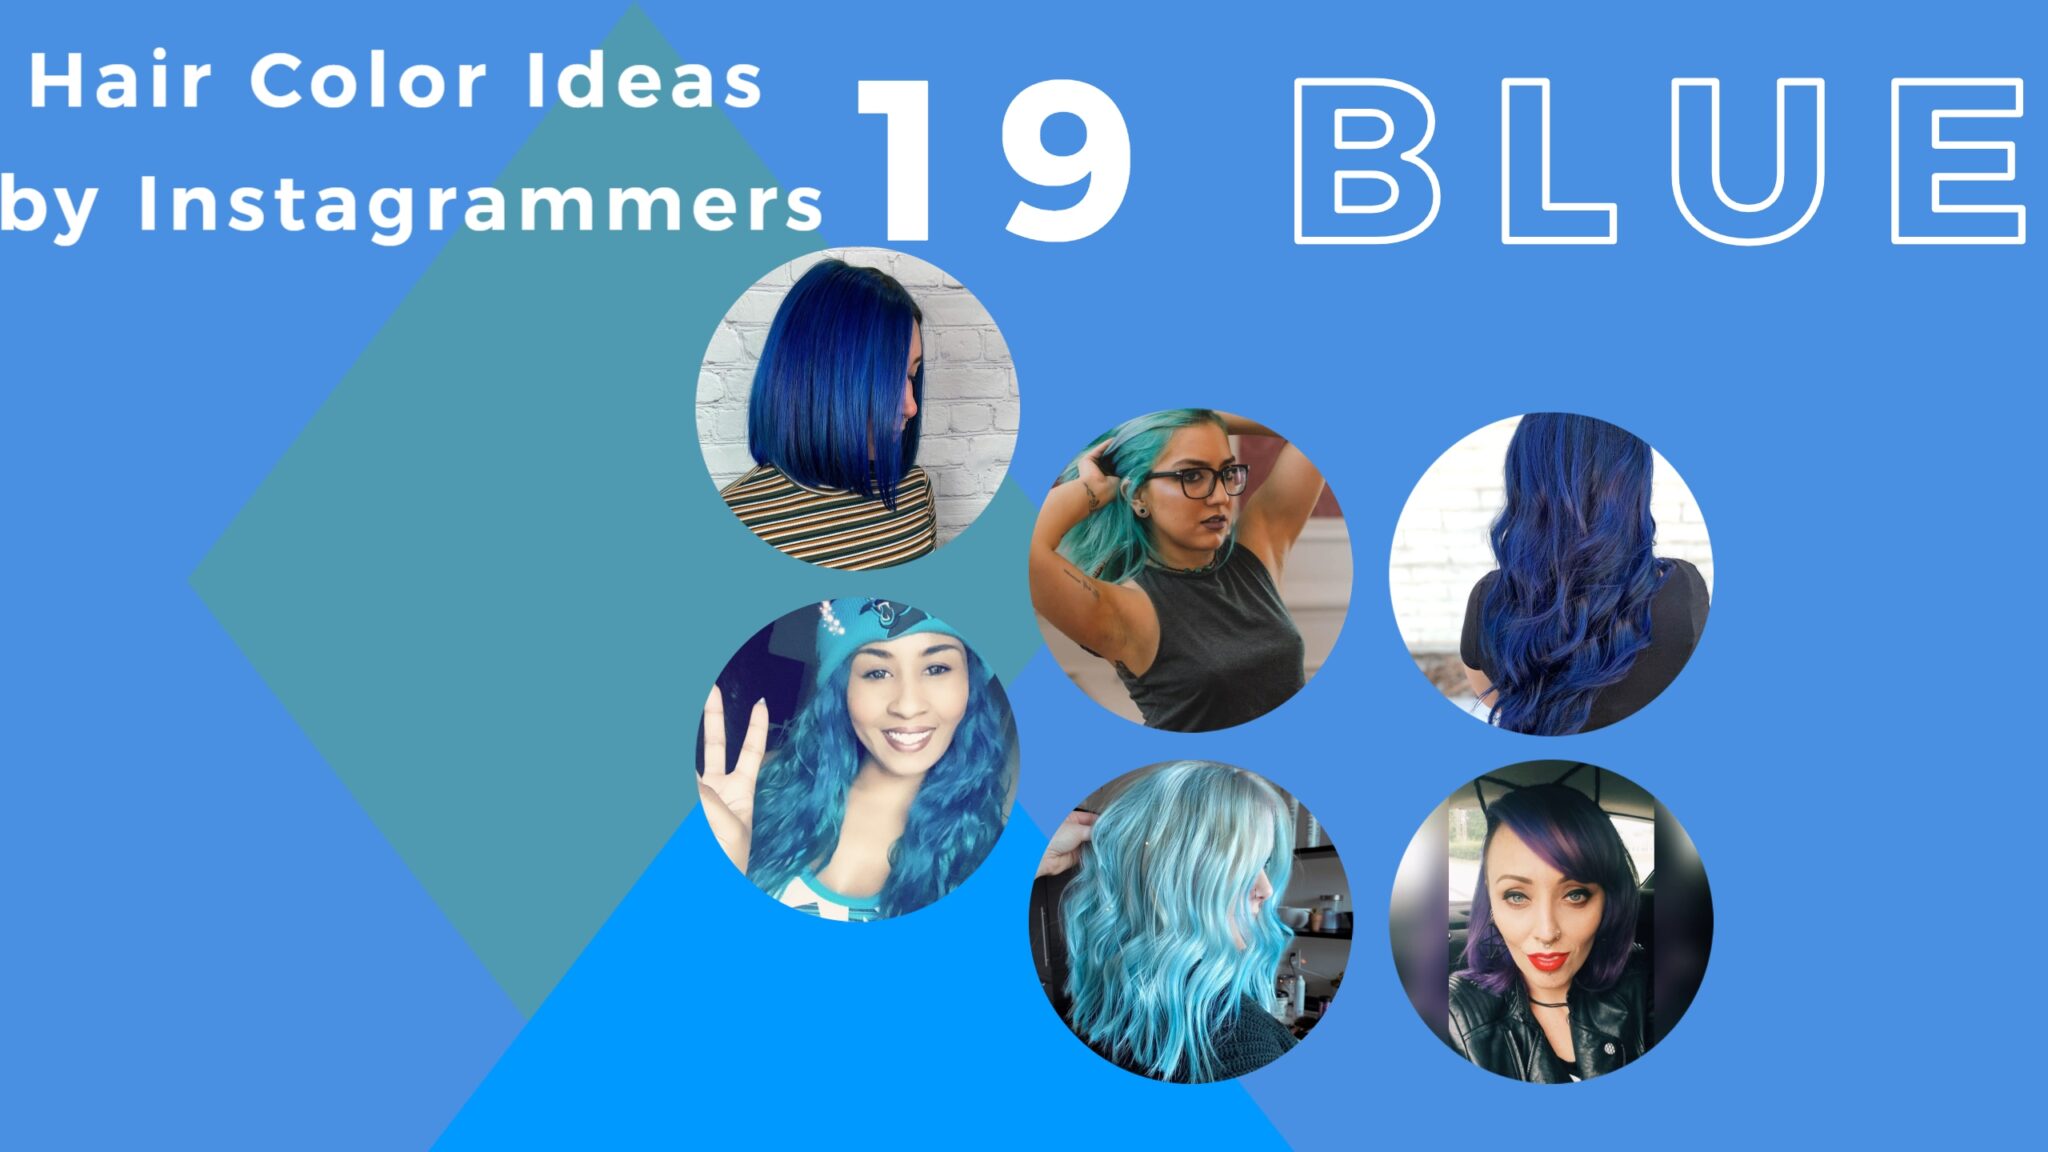 7. "Blue Hair Color for Dark Hair: How to Achieve the Look on Darker Hair Types" - wide 6